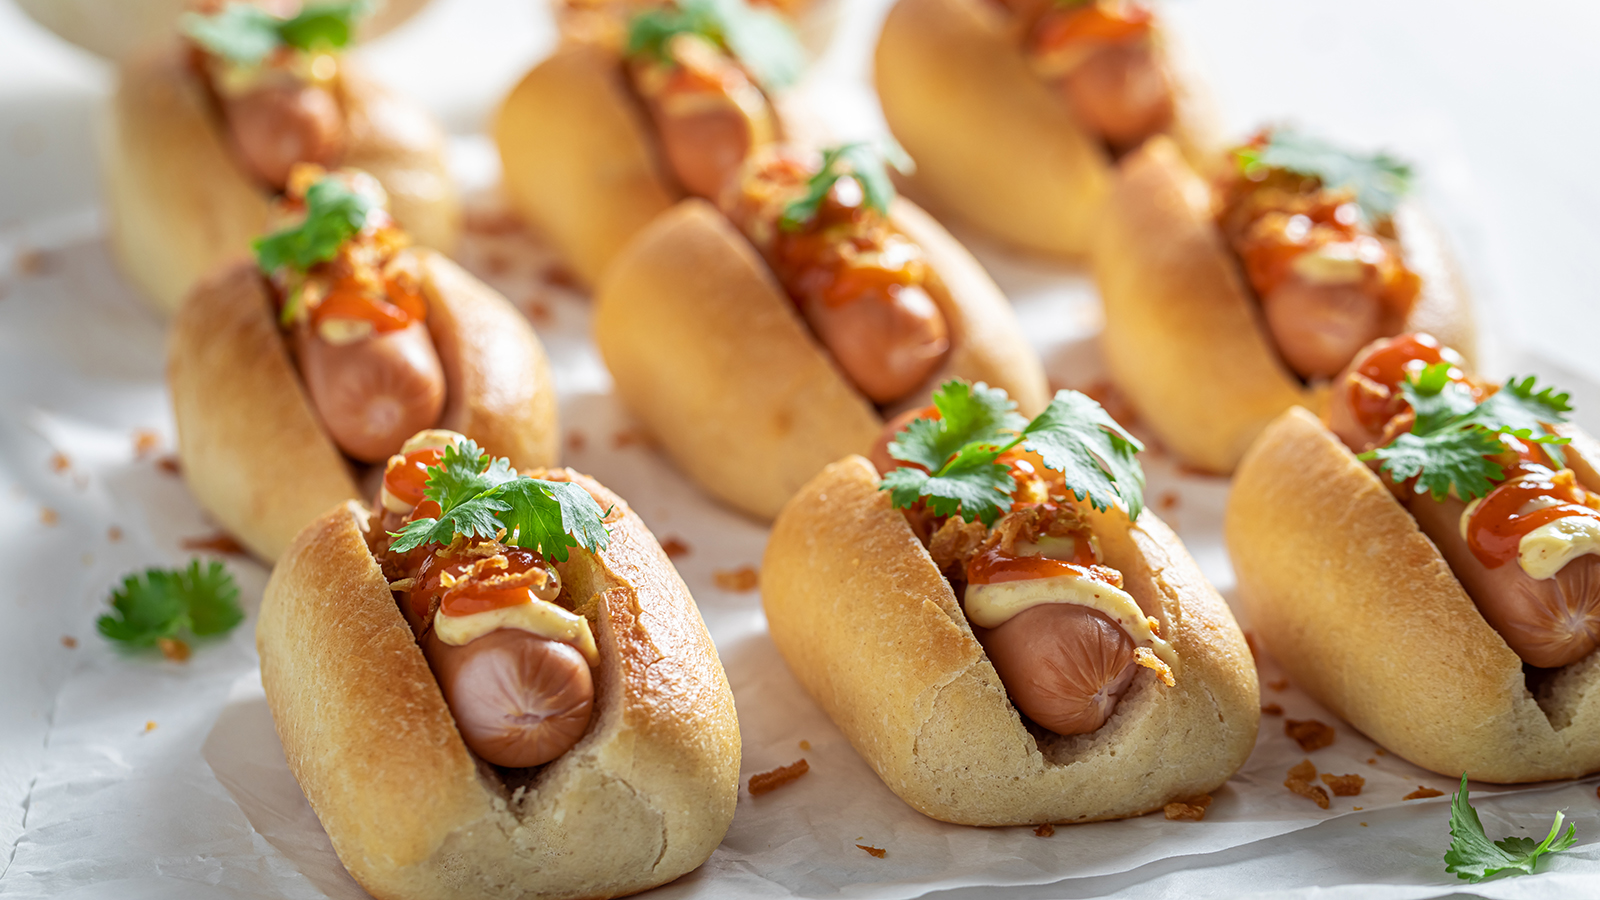 Spicy mini hot dogs with pork sausage and sauce